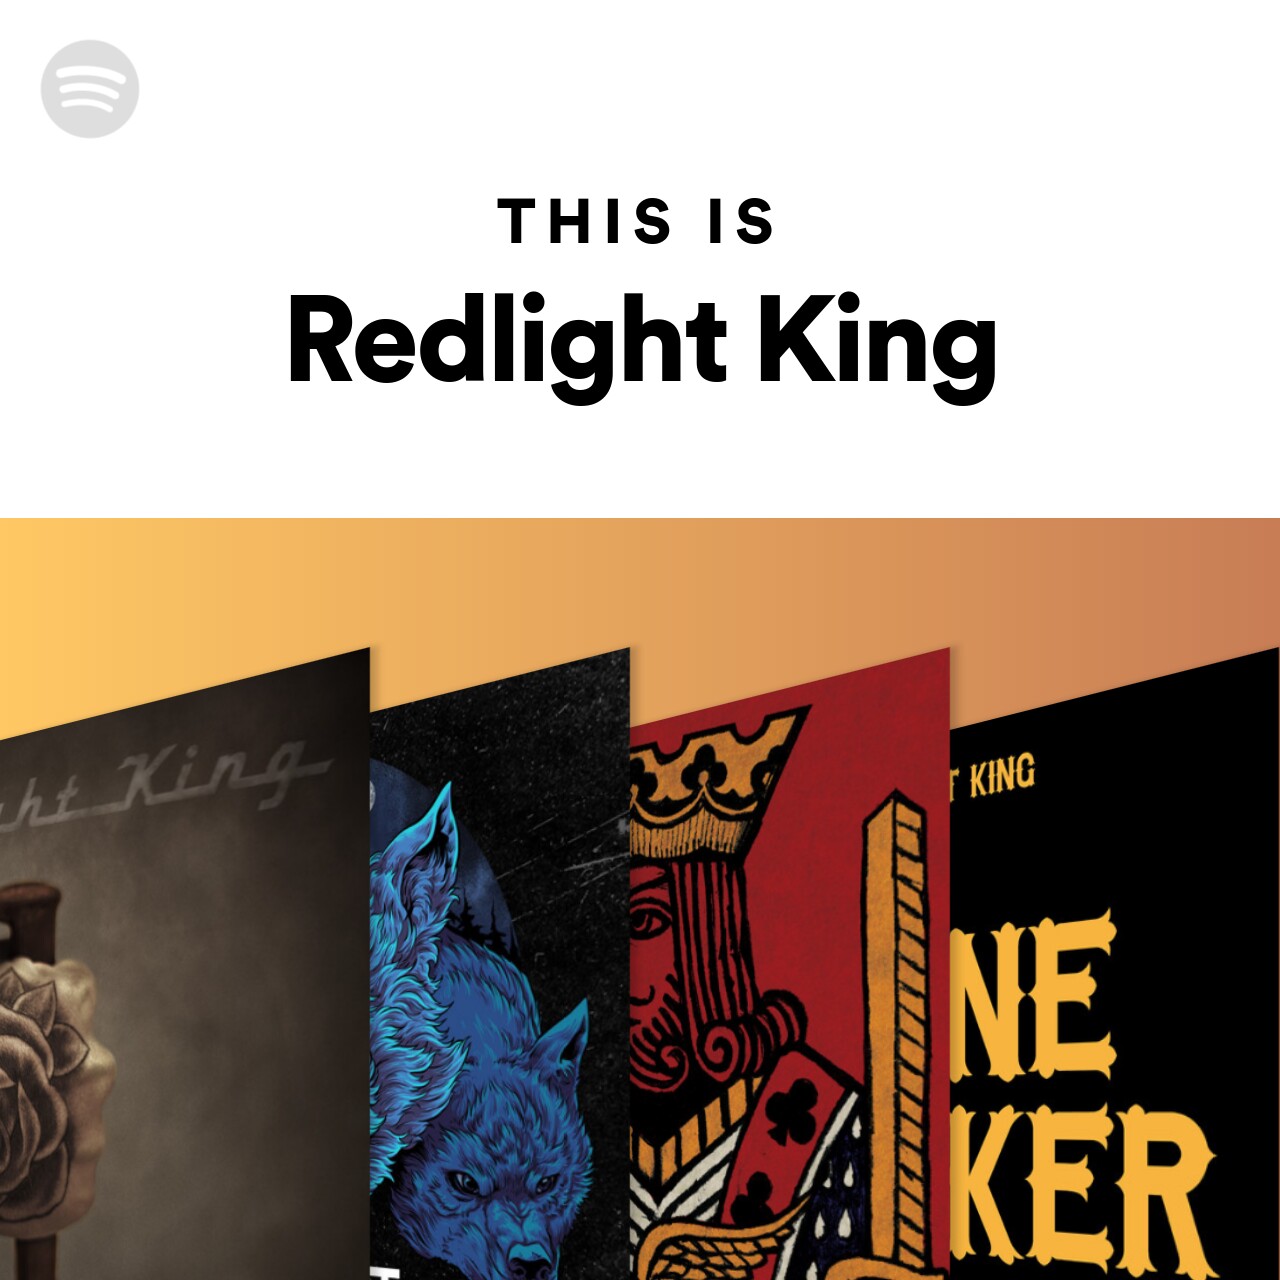 This Is Redlight King